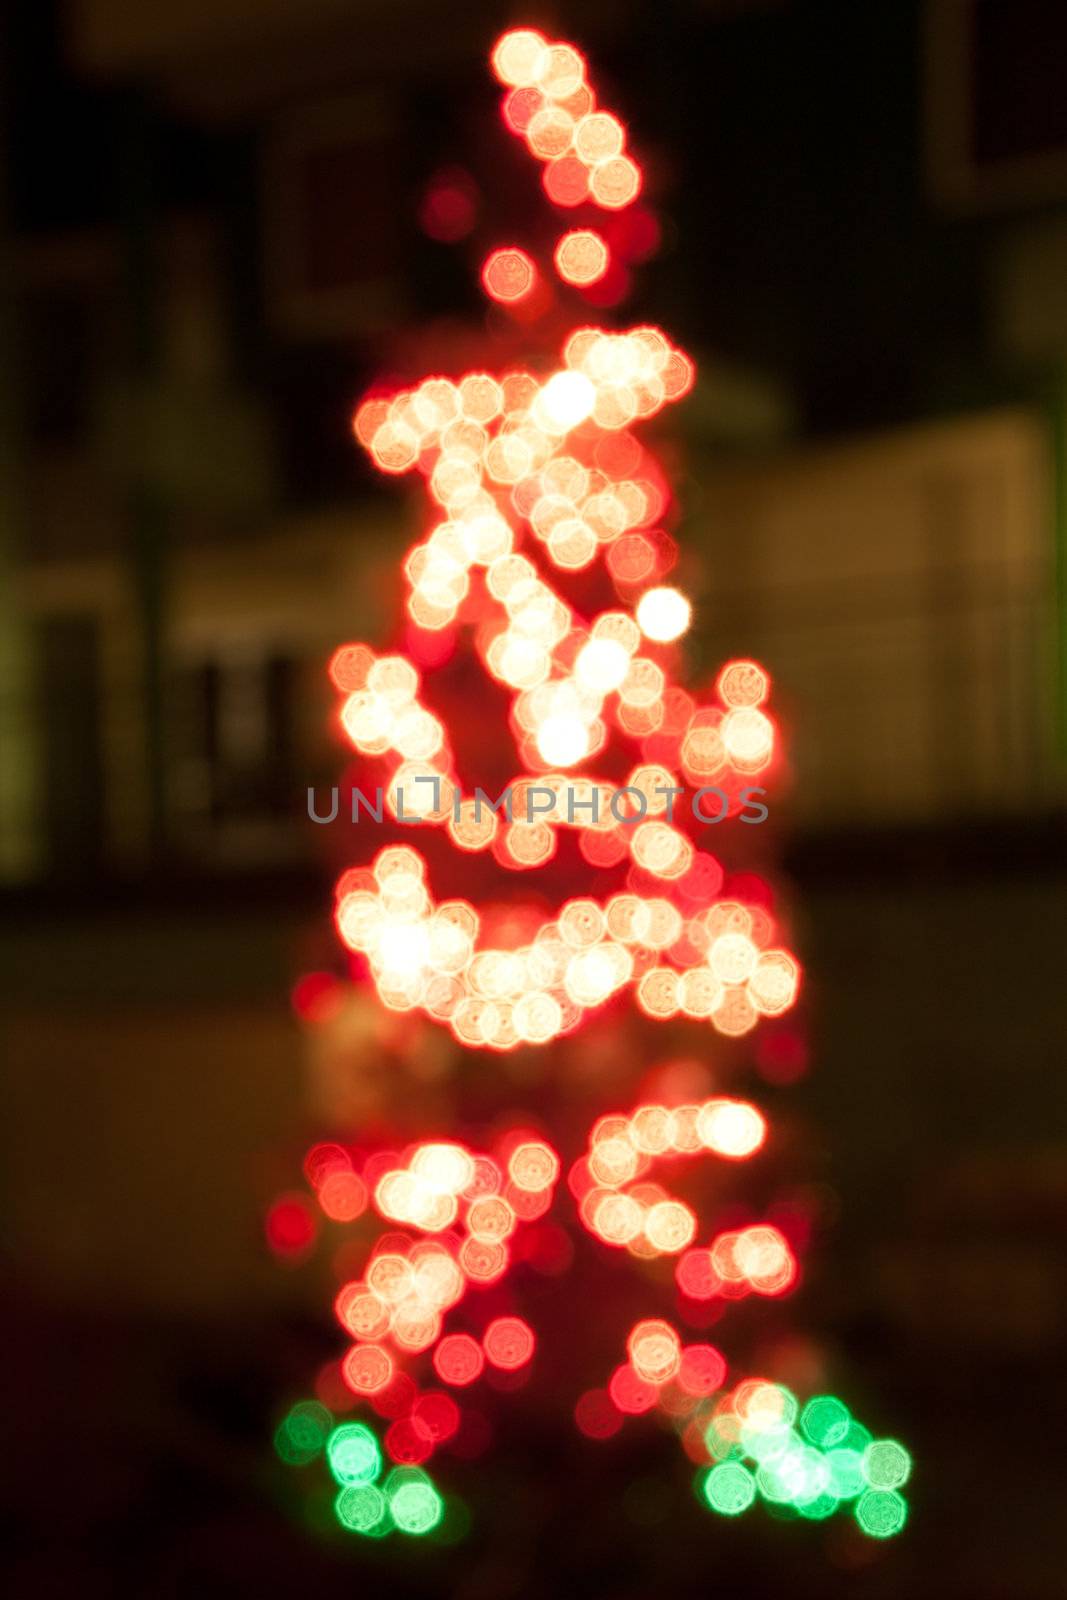 Christmas tree by aguirre_mar